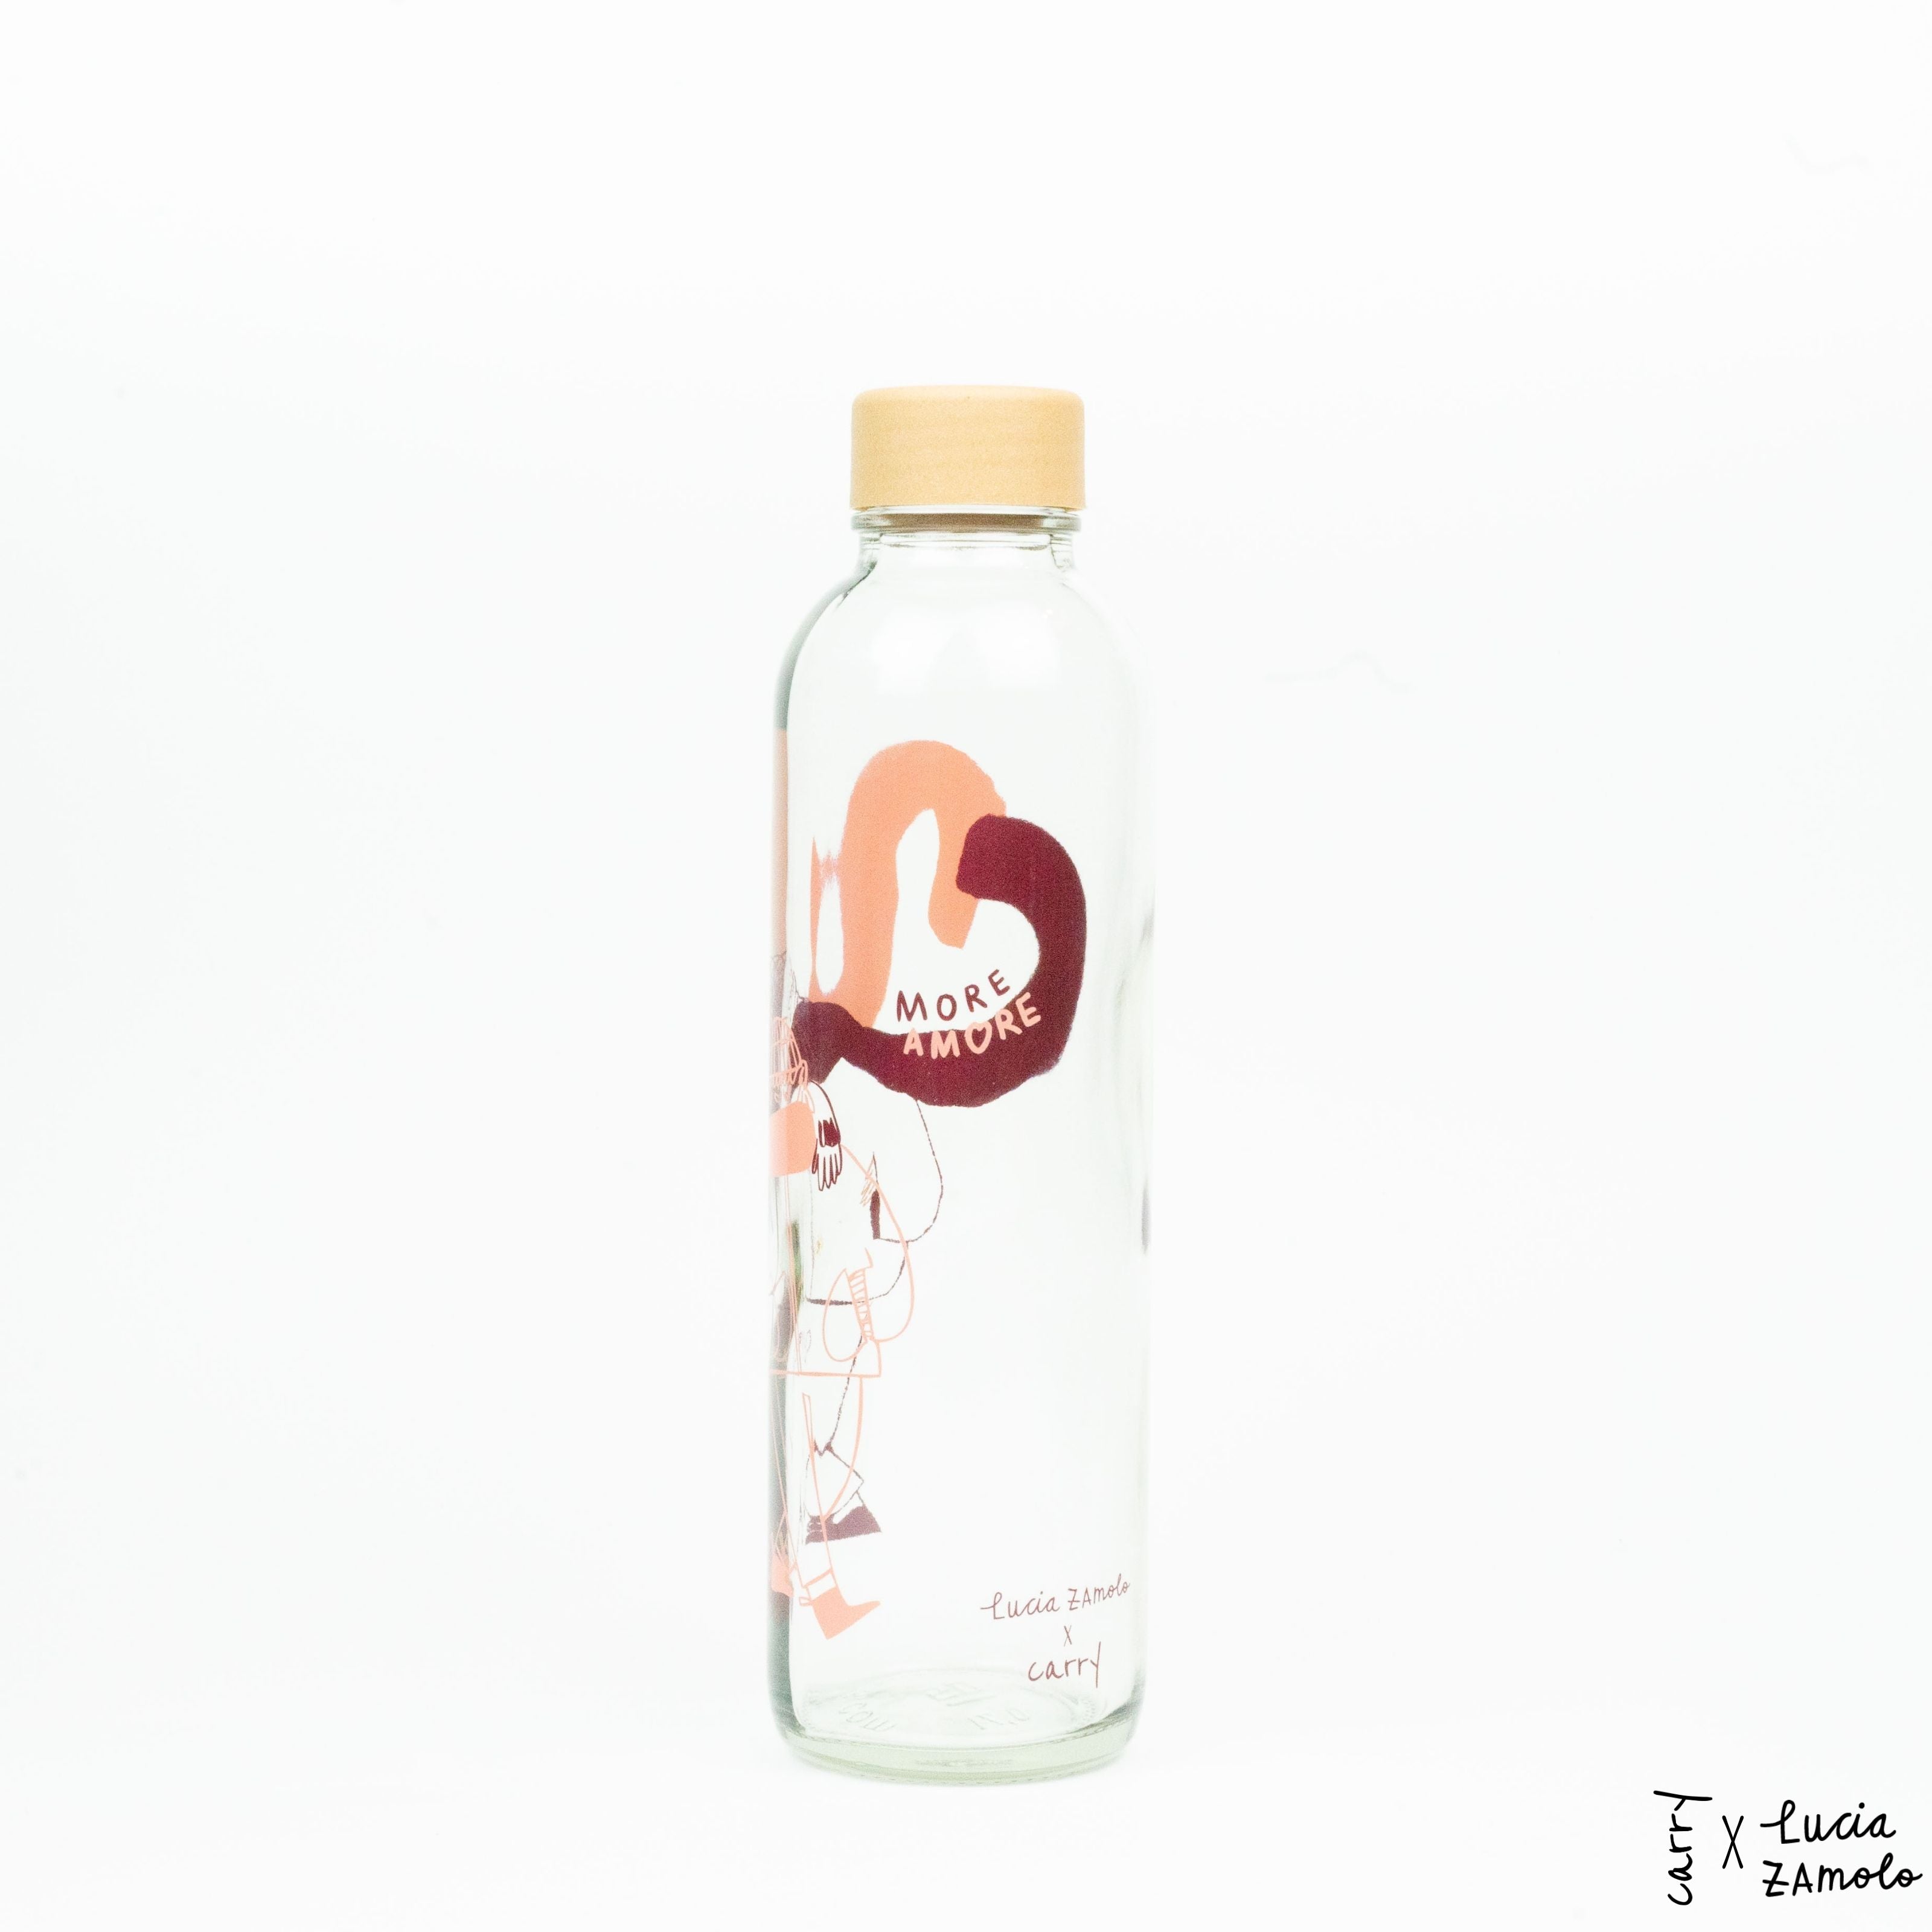 MORE AMORE RED 0,7 l Glasflasche